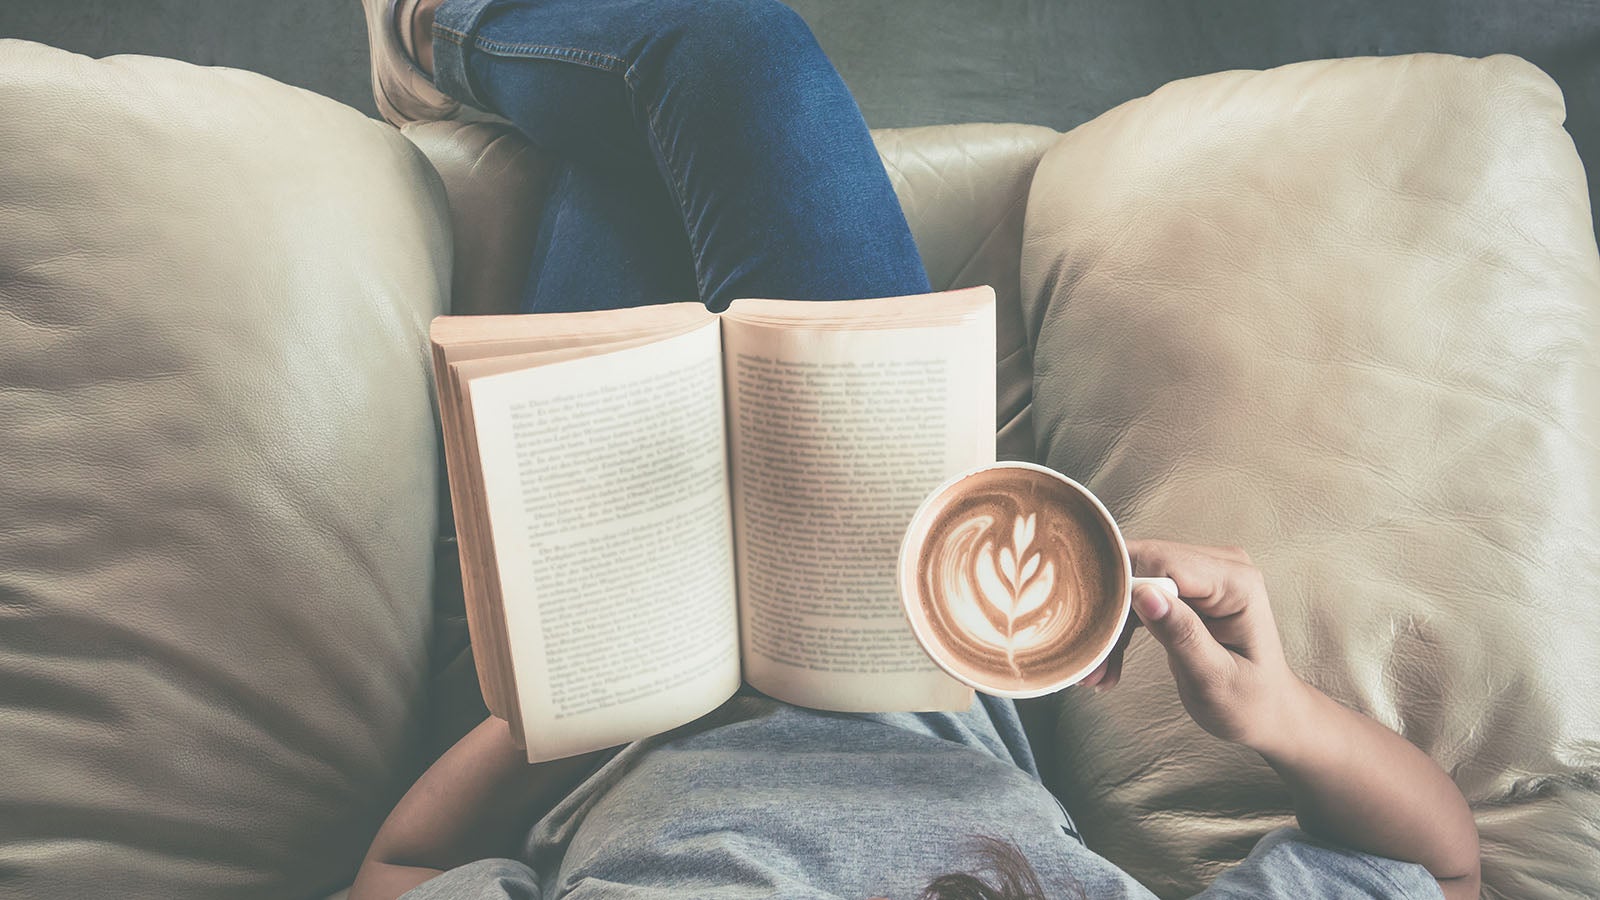 Image of a woman sitting on a sofa reading a book and holding a coffee